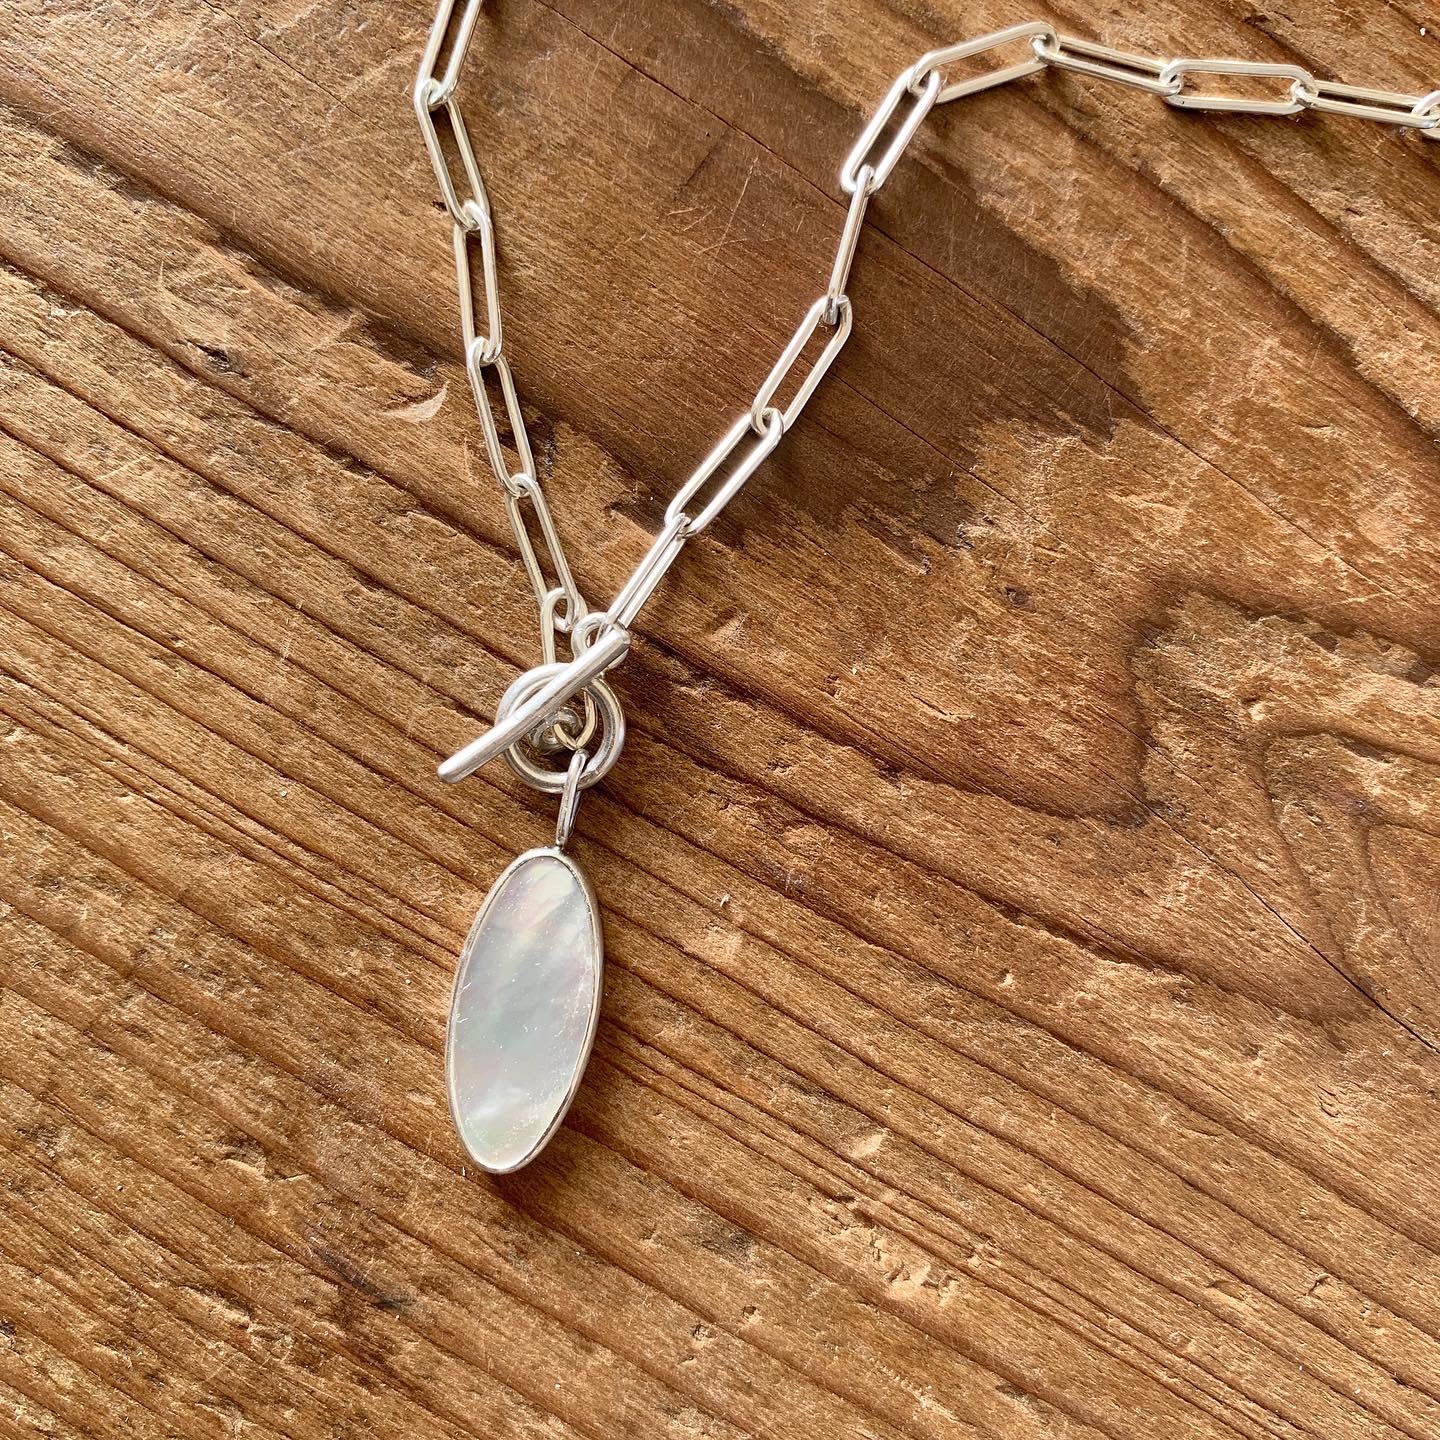 White Oval Pendant Necklace